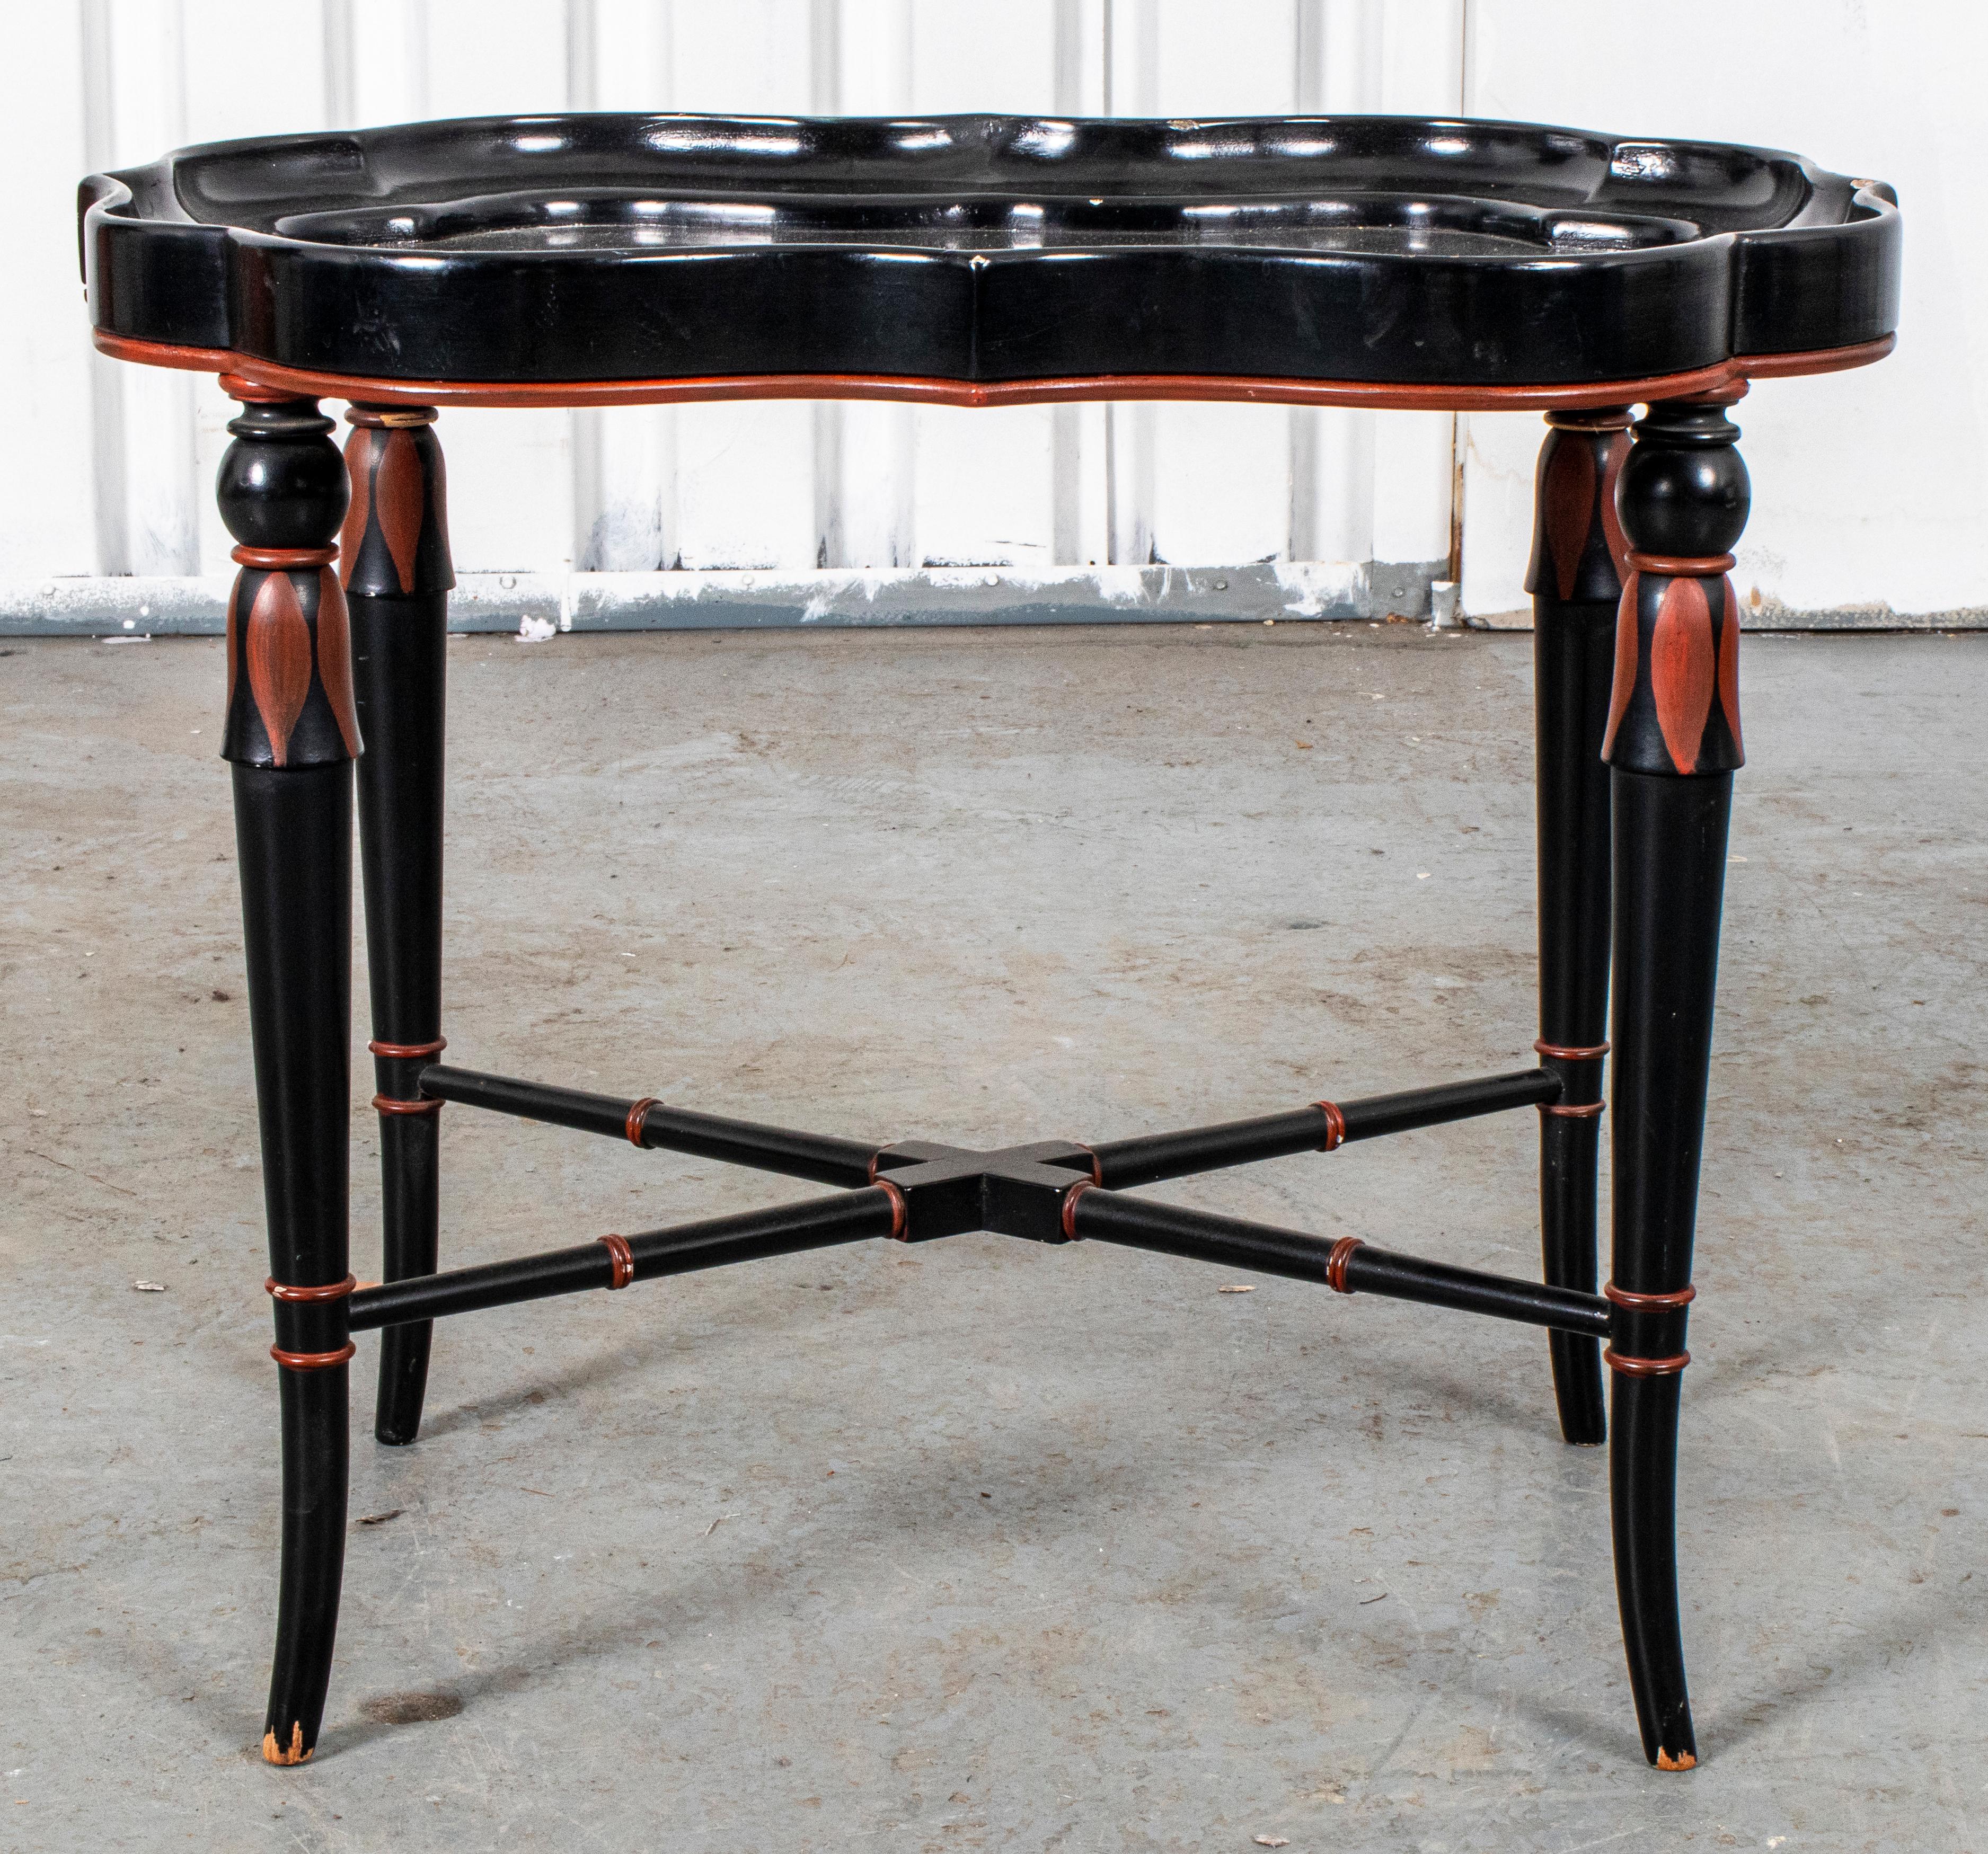 Victorian ebonized tray side table with scalloped borders and parcel painted legs. Measures: 18